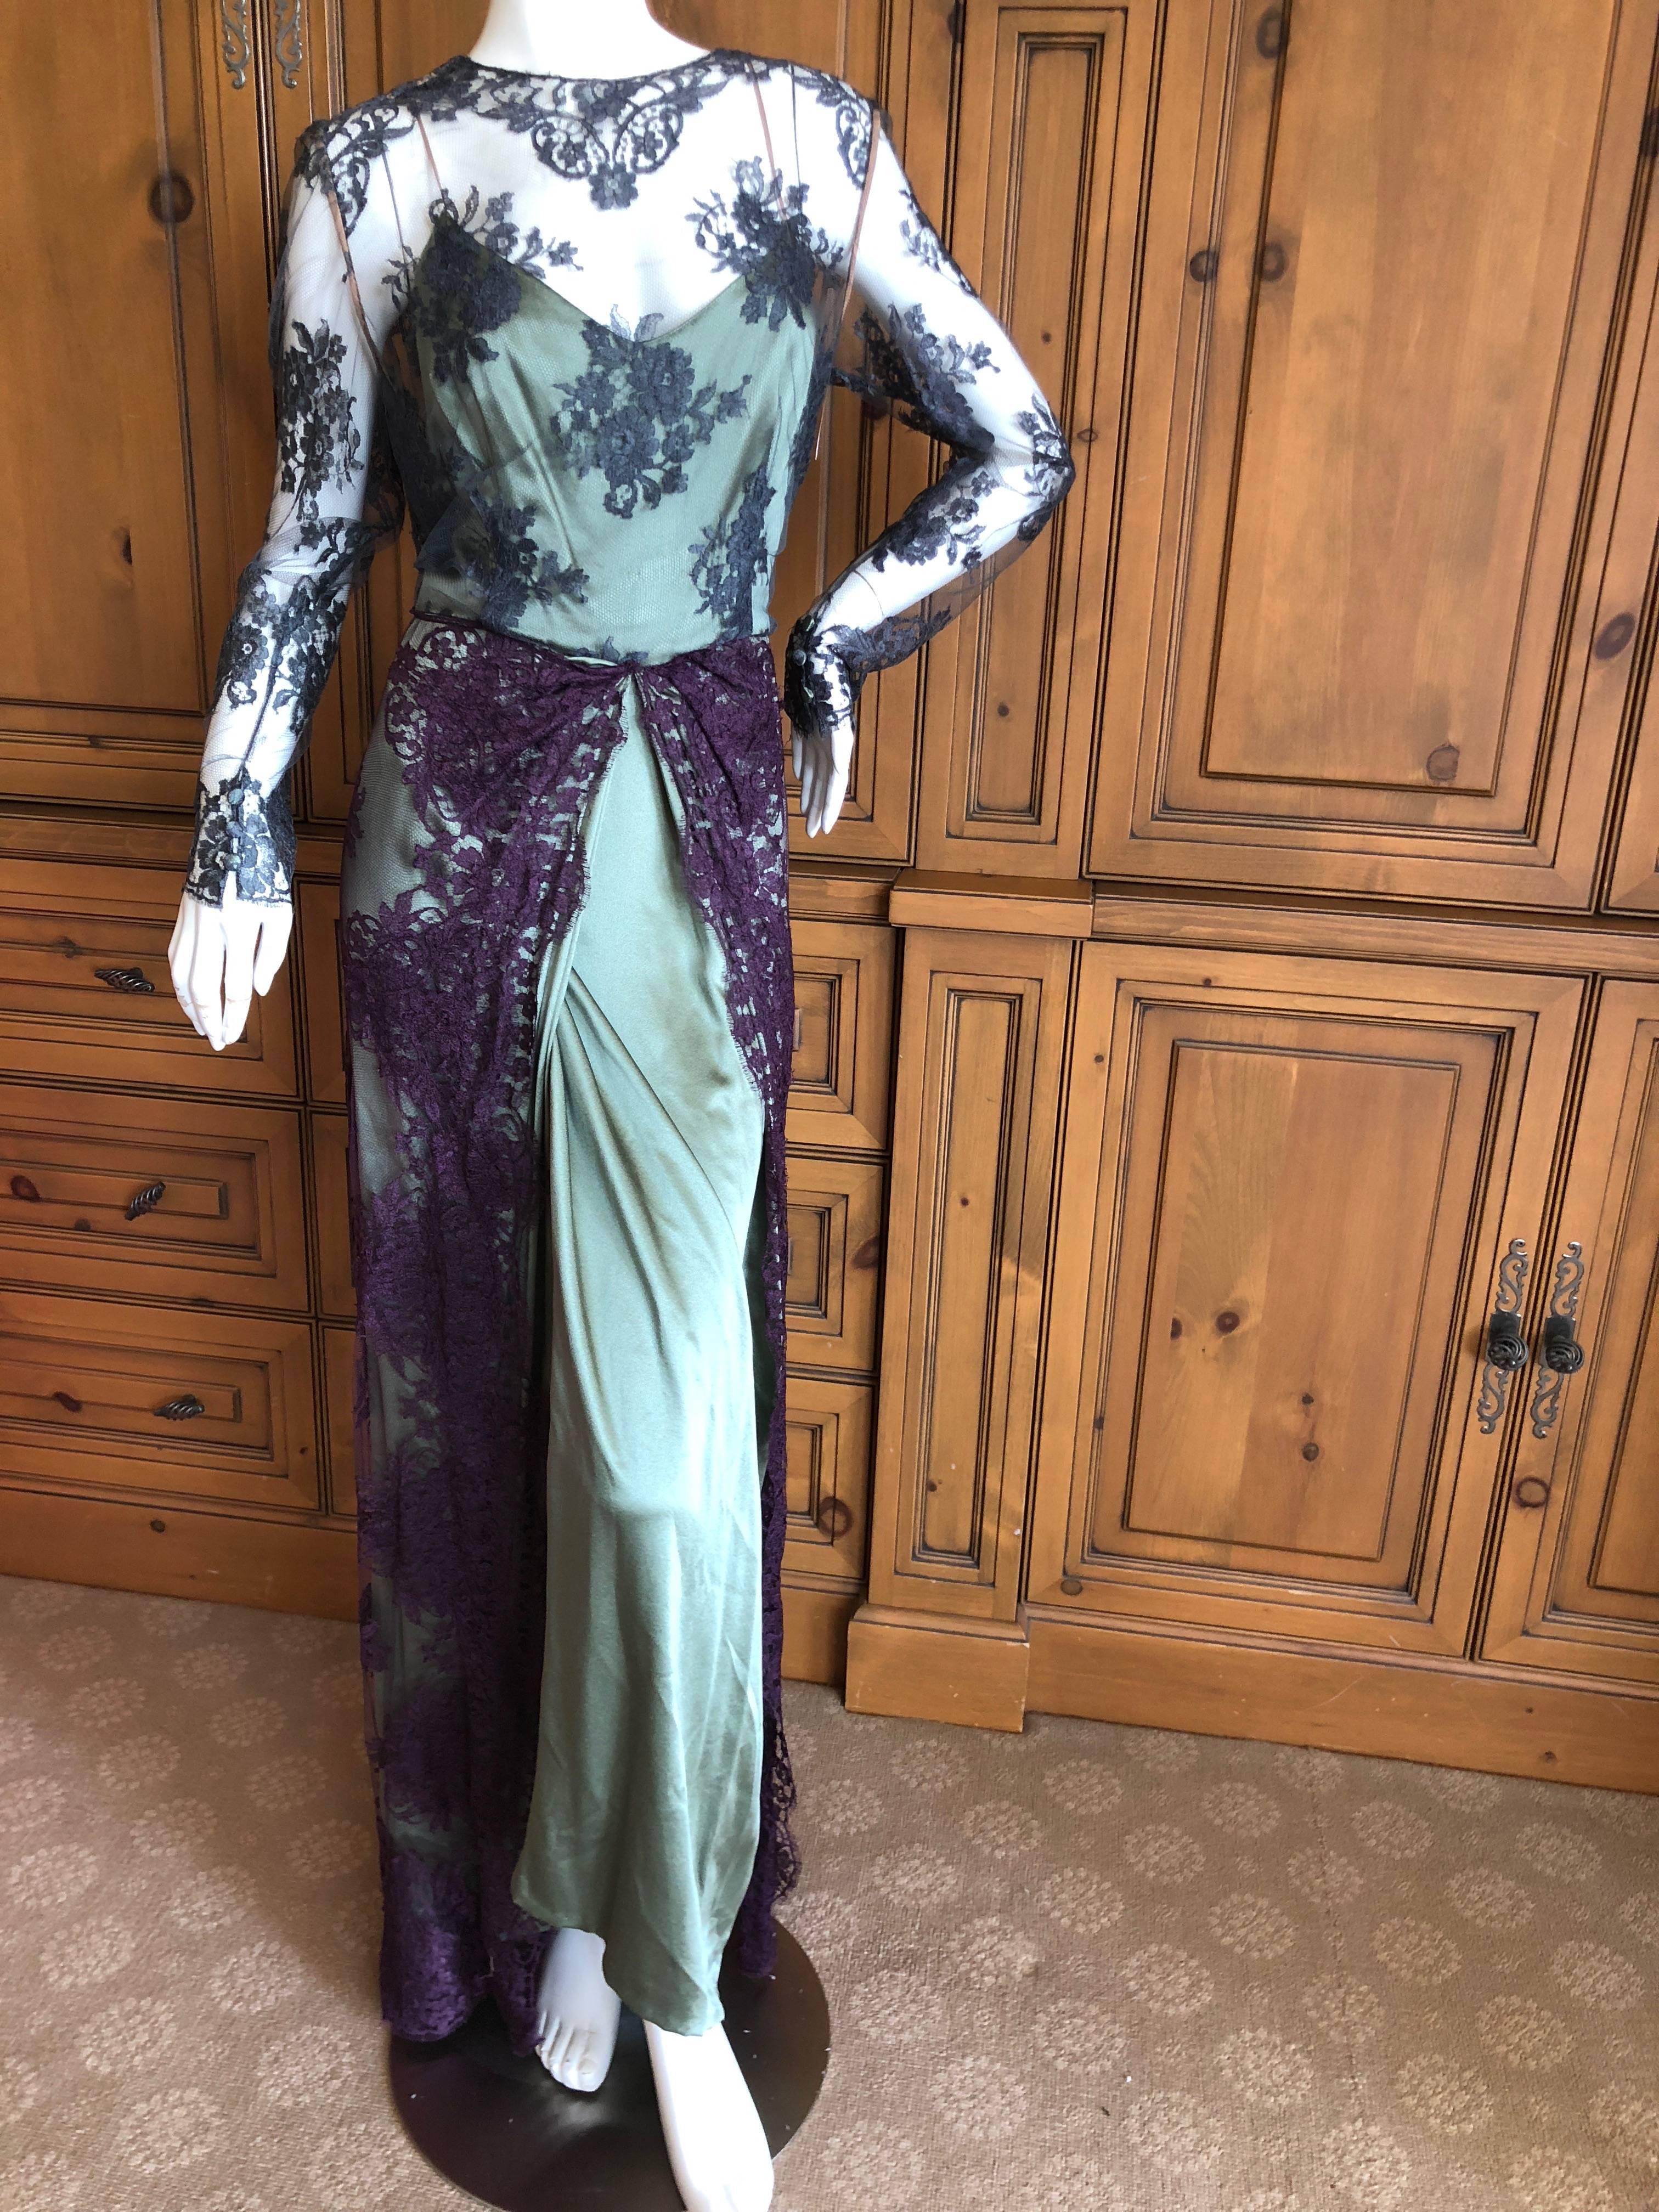 Bill Blass Vintage 1970's Silk Evening Dress with Lace Overlay Details For Sale 1